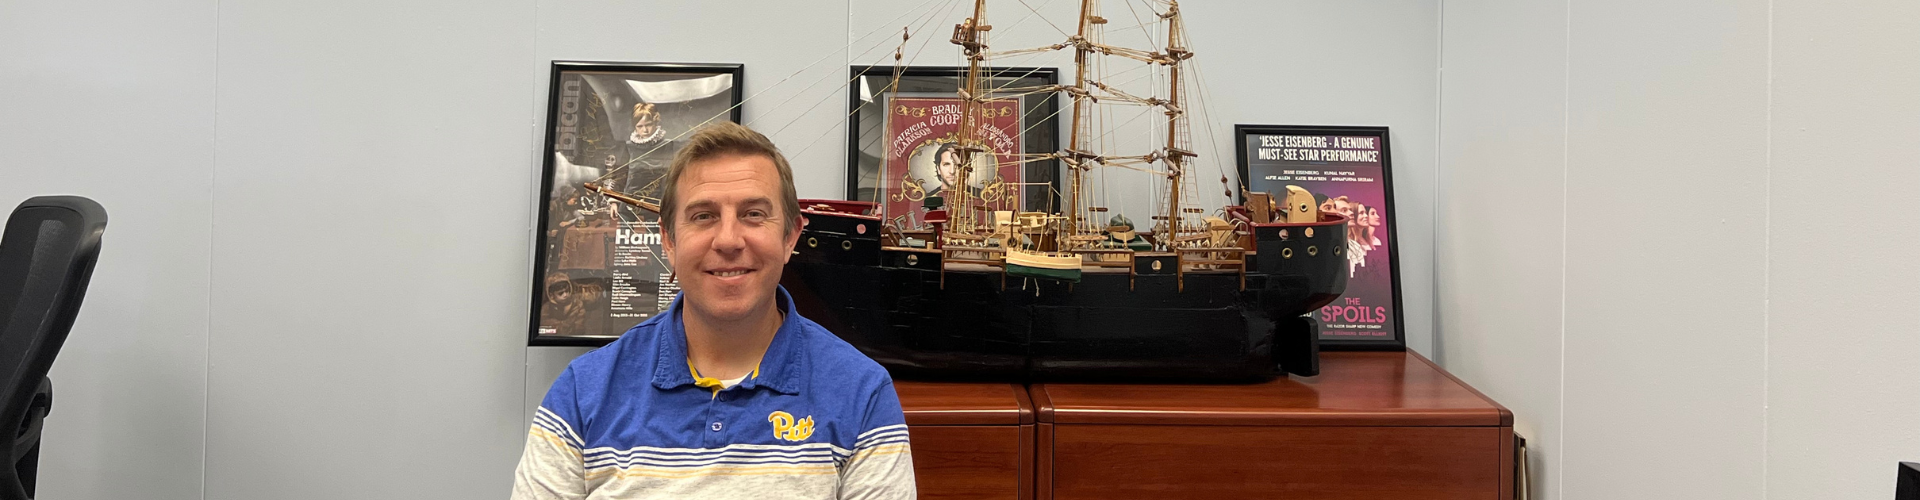 Jeff Whitehead sits in front of large model of ship, with various movie posters on the wall behind him.